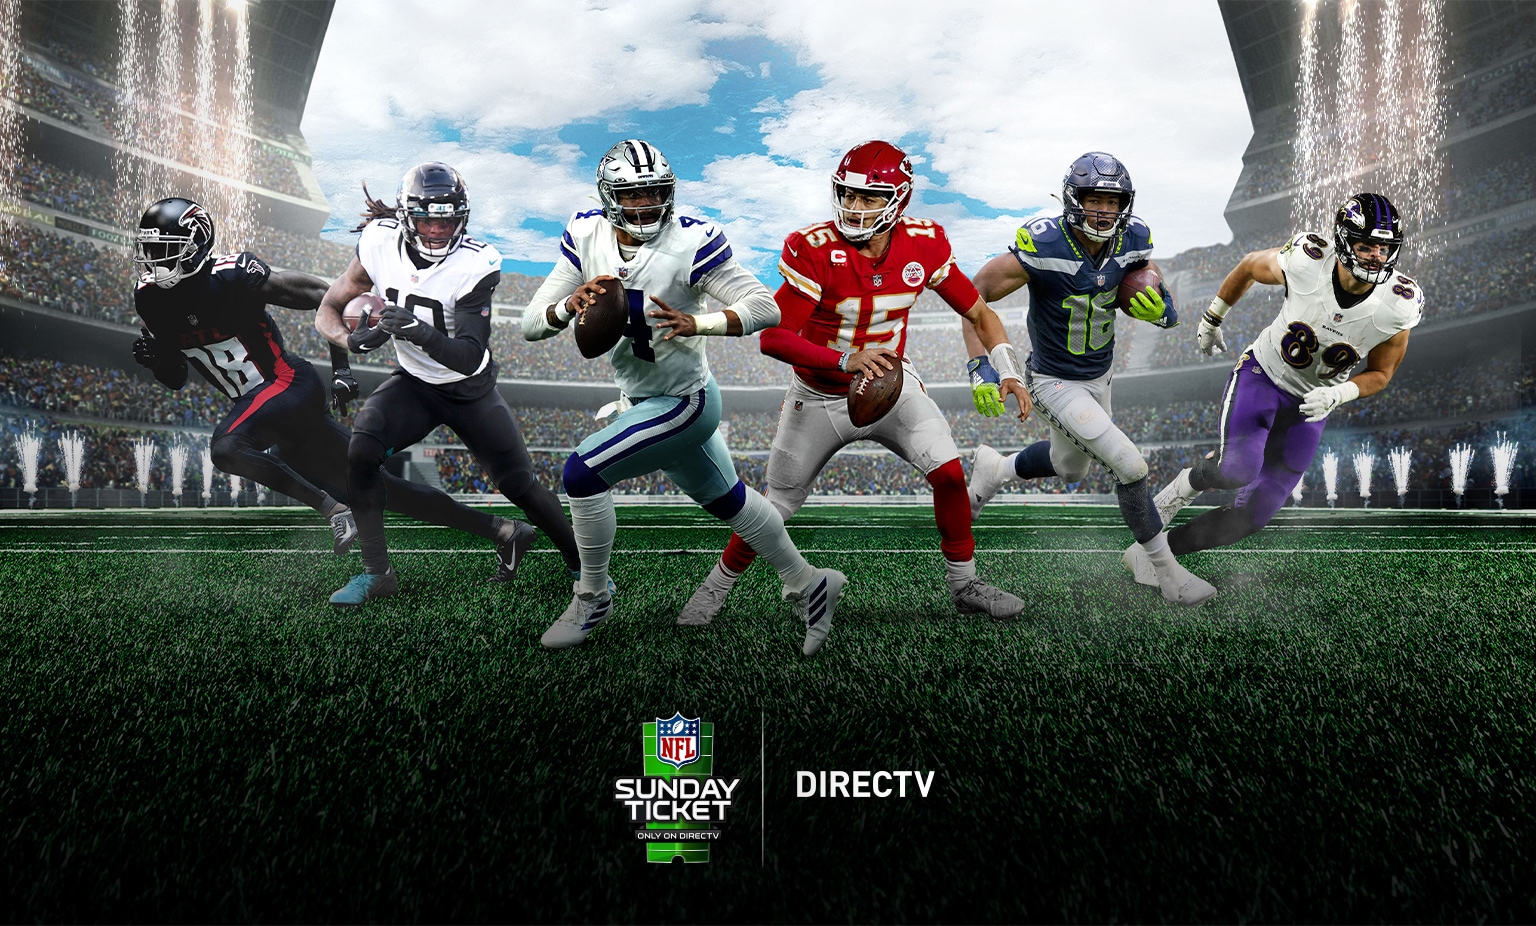 Apple TV is the Leader to Secure the NFL Sunday Ticket – BlackSportsOnline